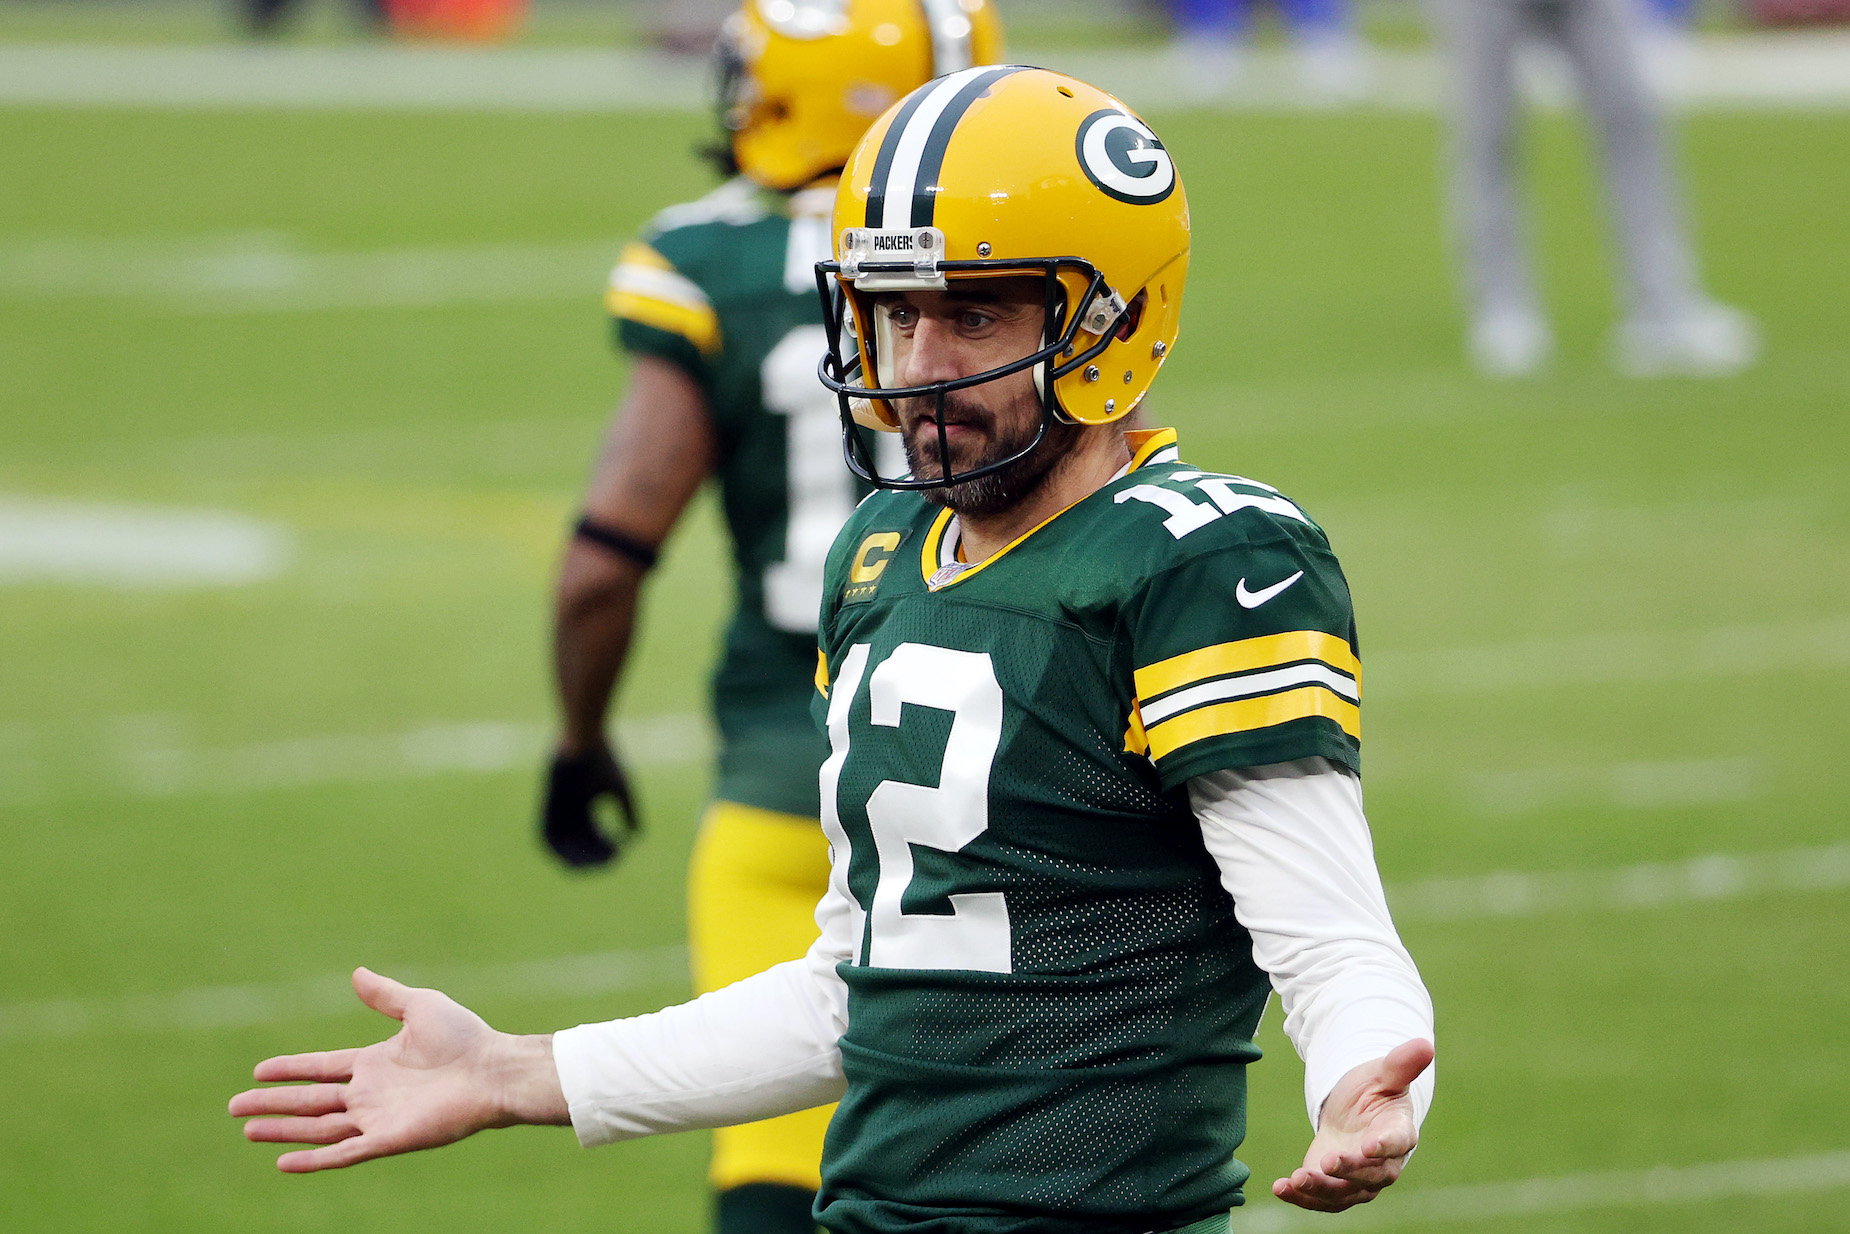 Green Bay Packers quarterback Aaron Rodgers gestures on the field